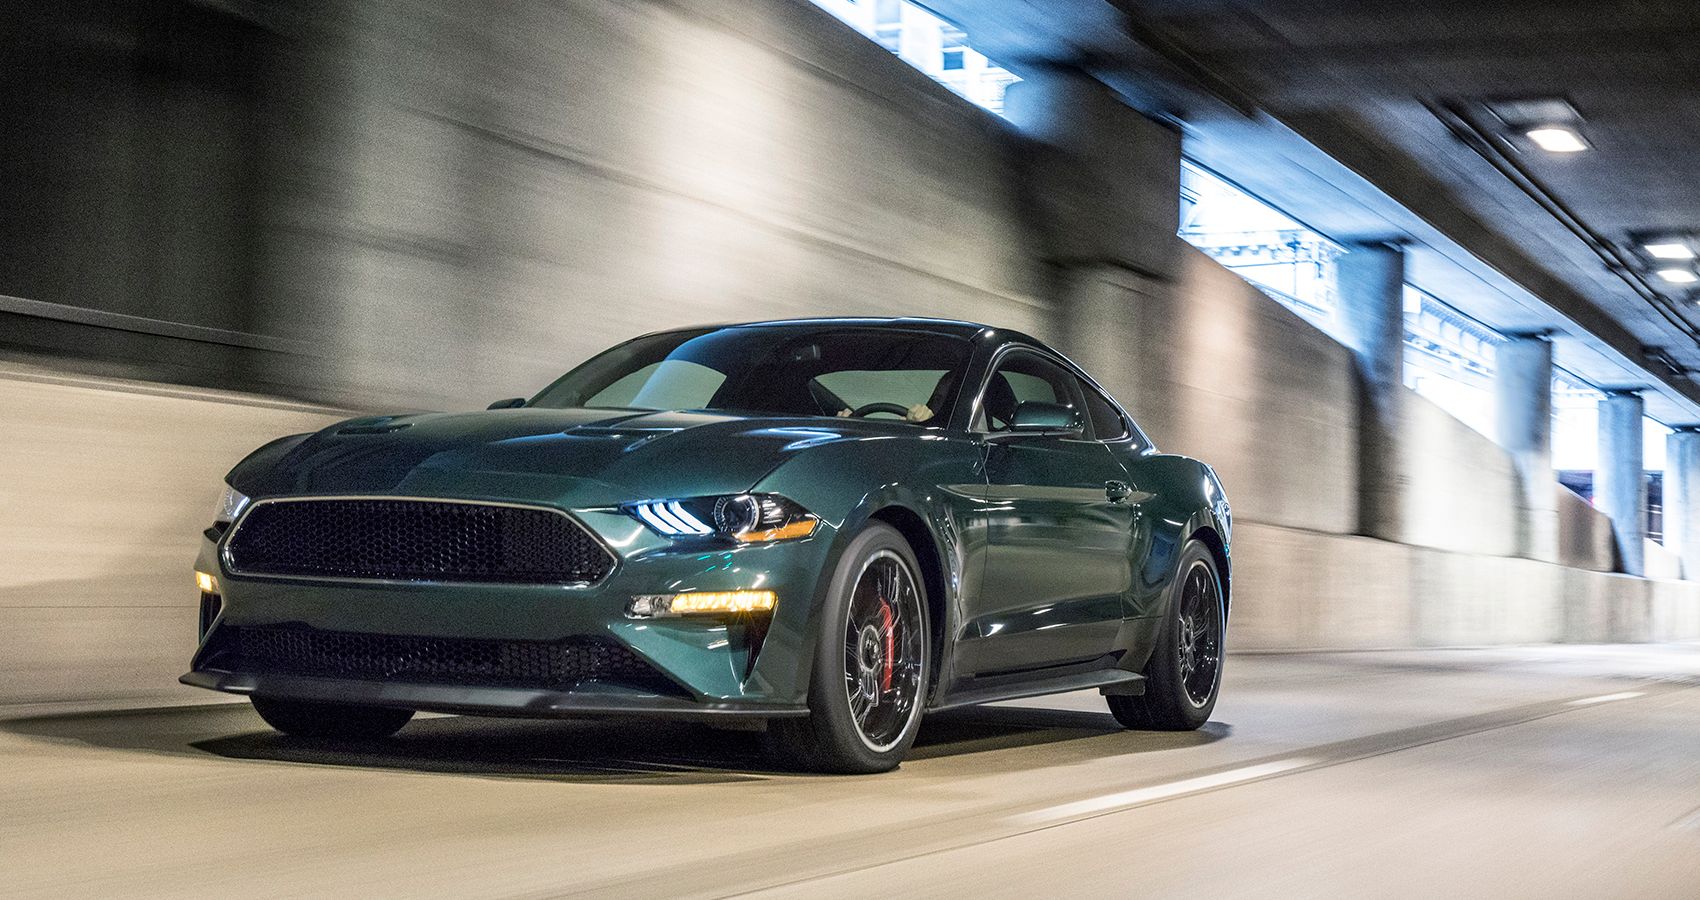 2019 Ford Mustang Bullitt Edition In Green Front View